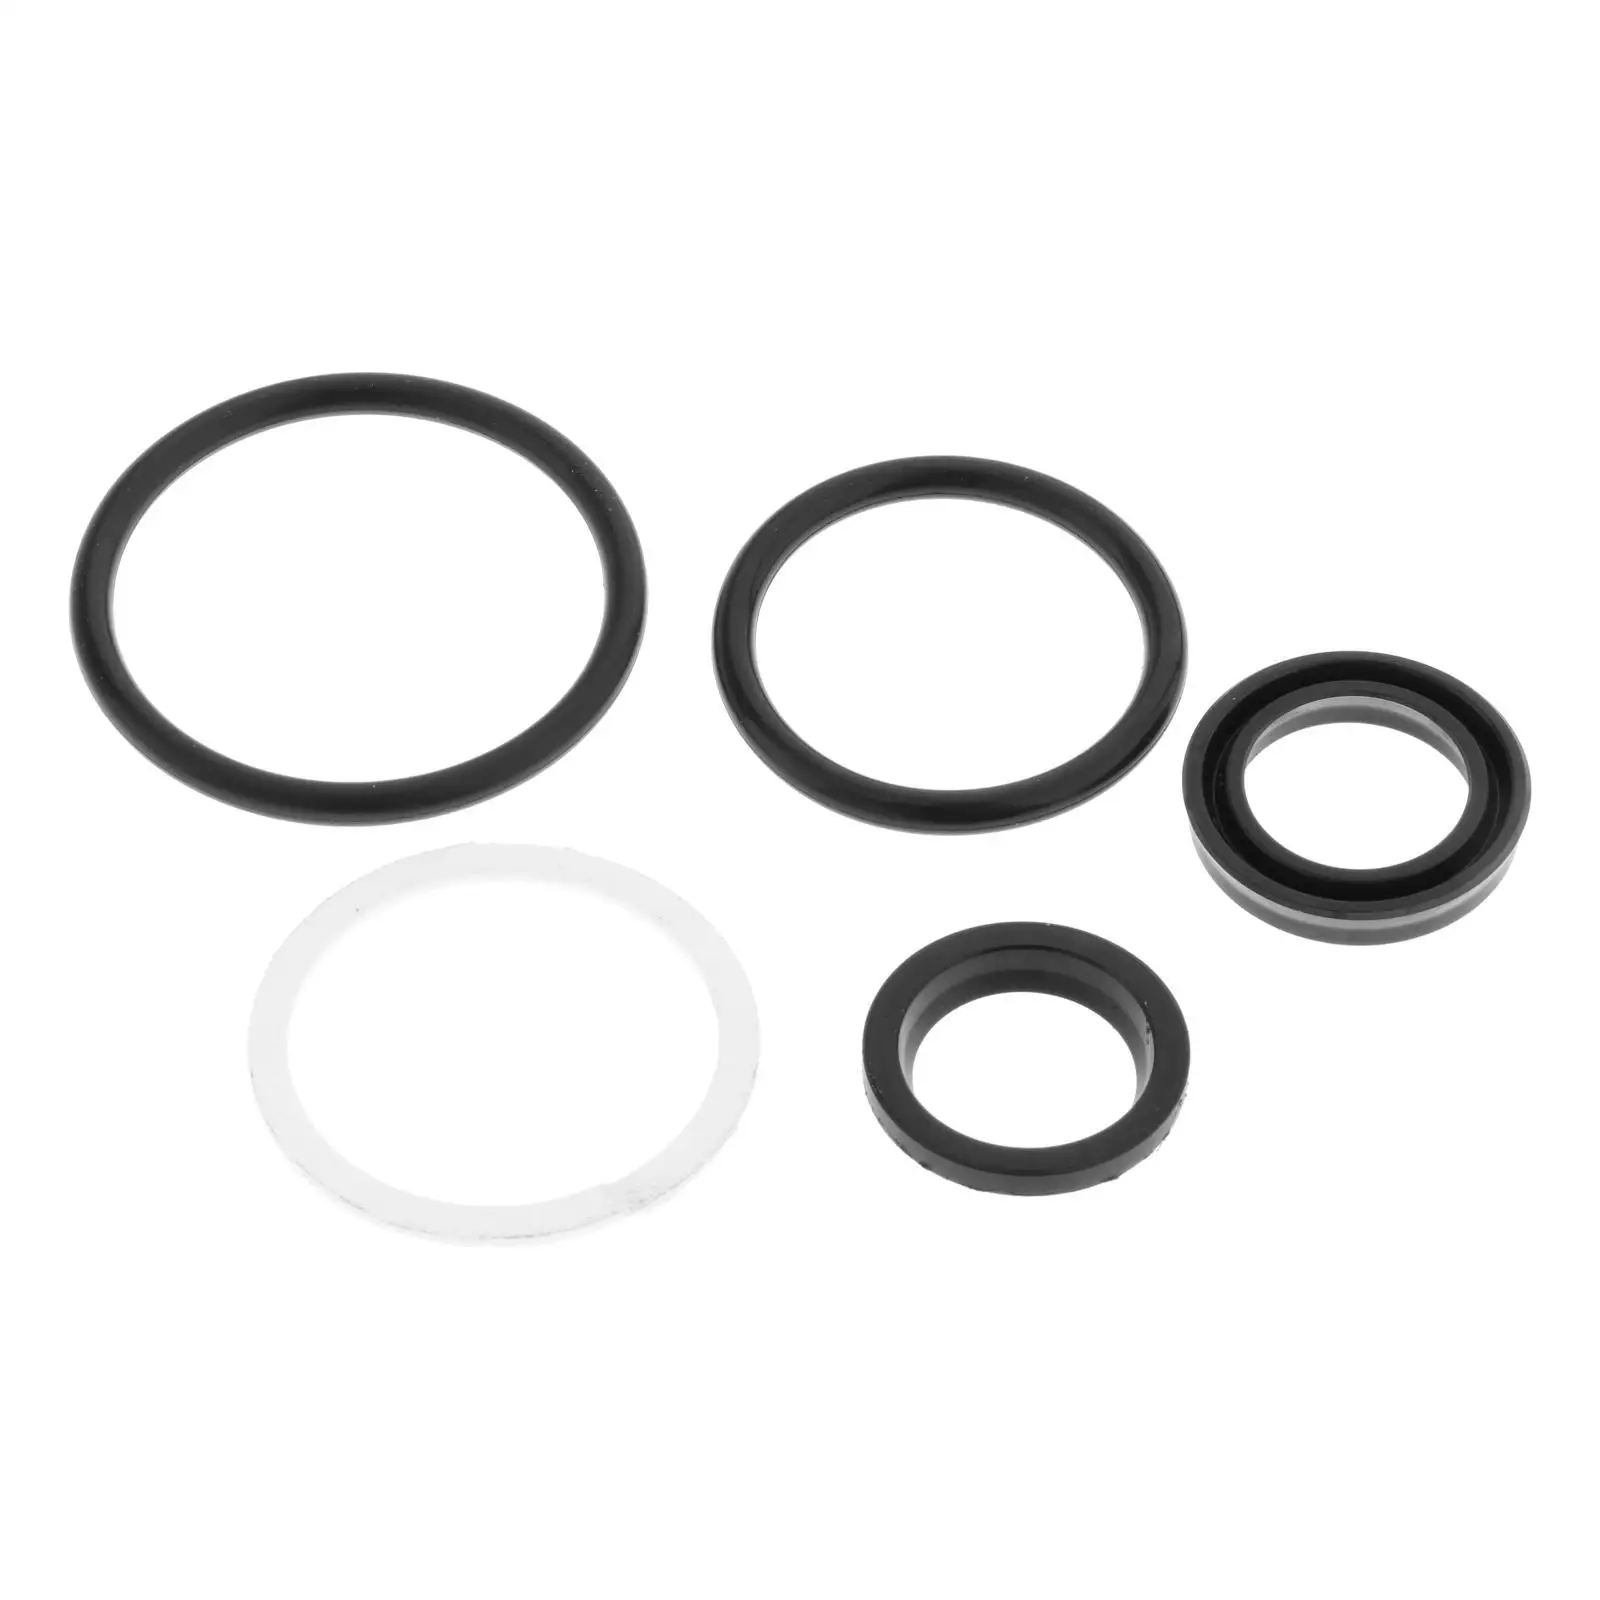 Seal and O-Ring Screw Kit Replacement Spare Parts Fit for Yamaha Outboard High Performance